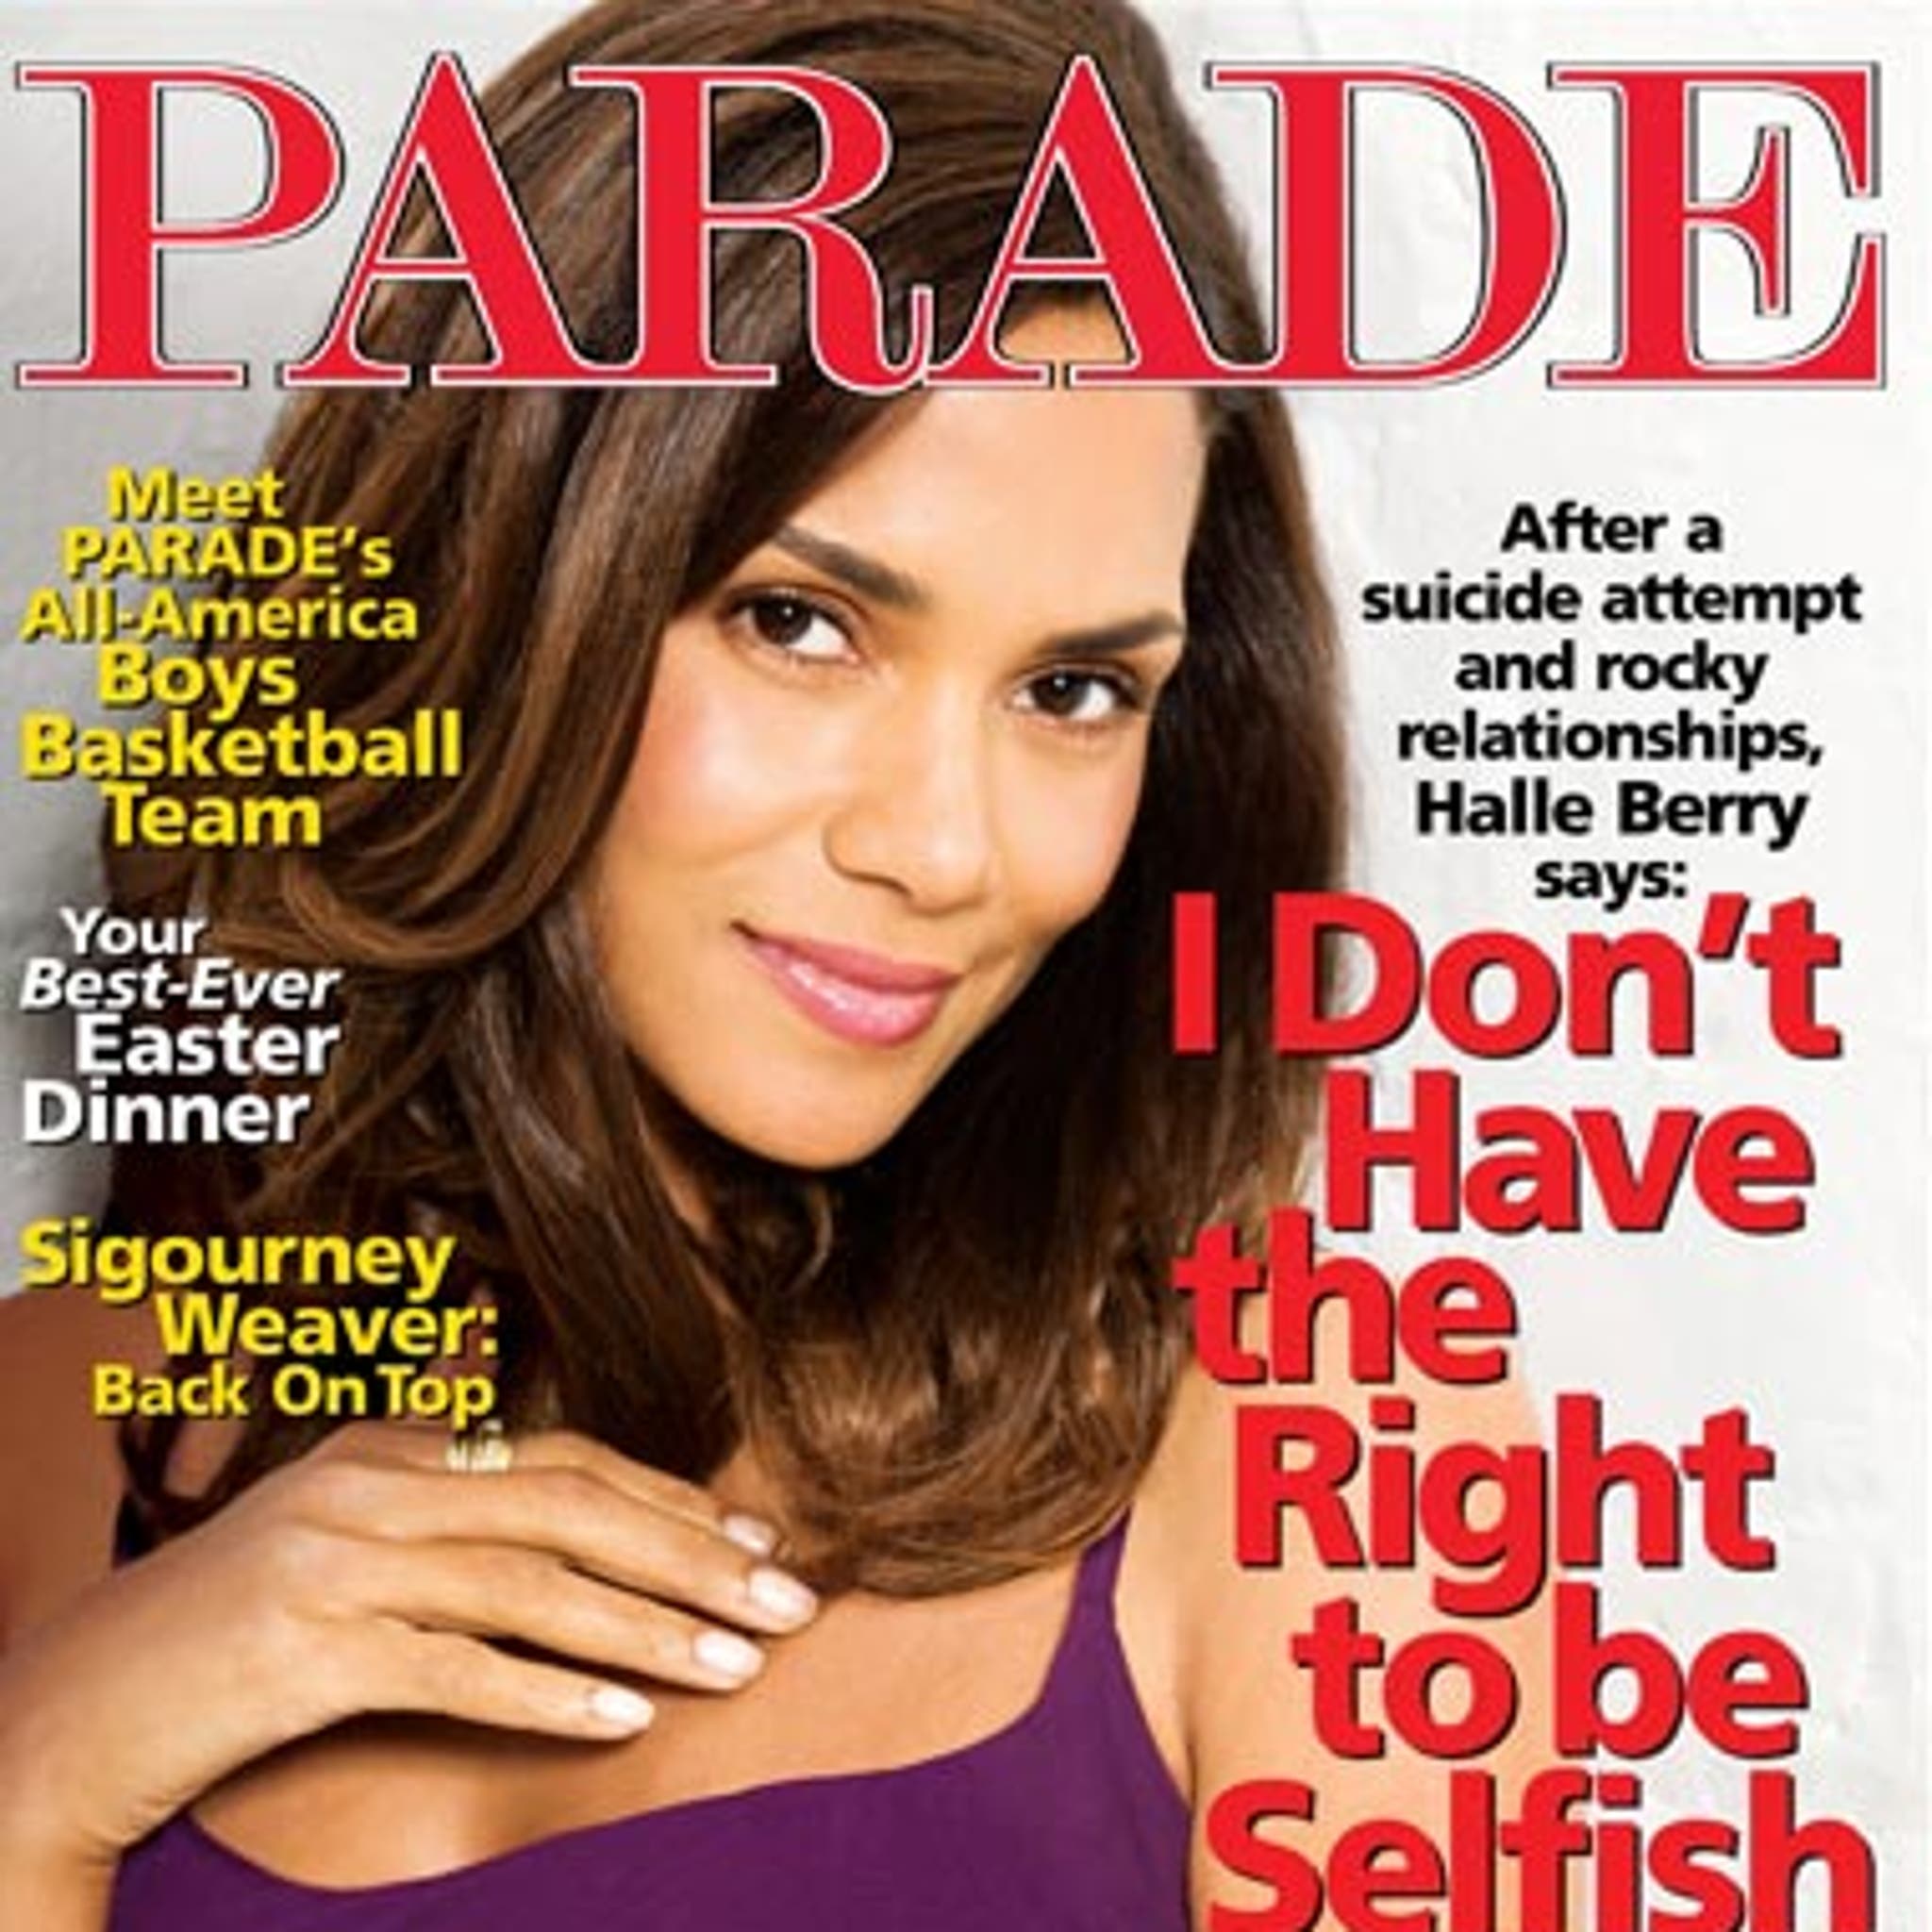 Halle Berry Husband - Is Halle Berry Married? - Parade